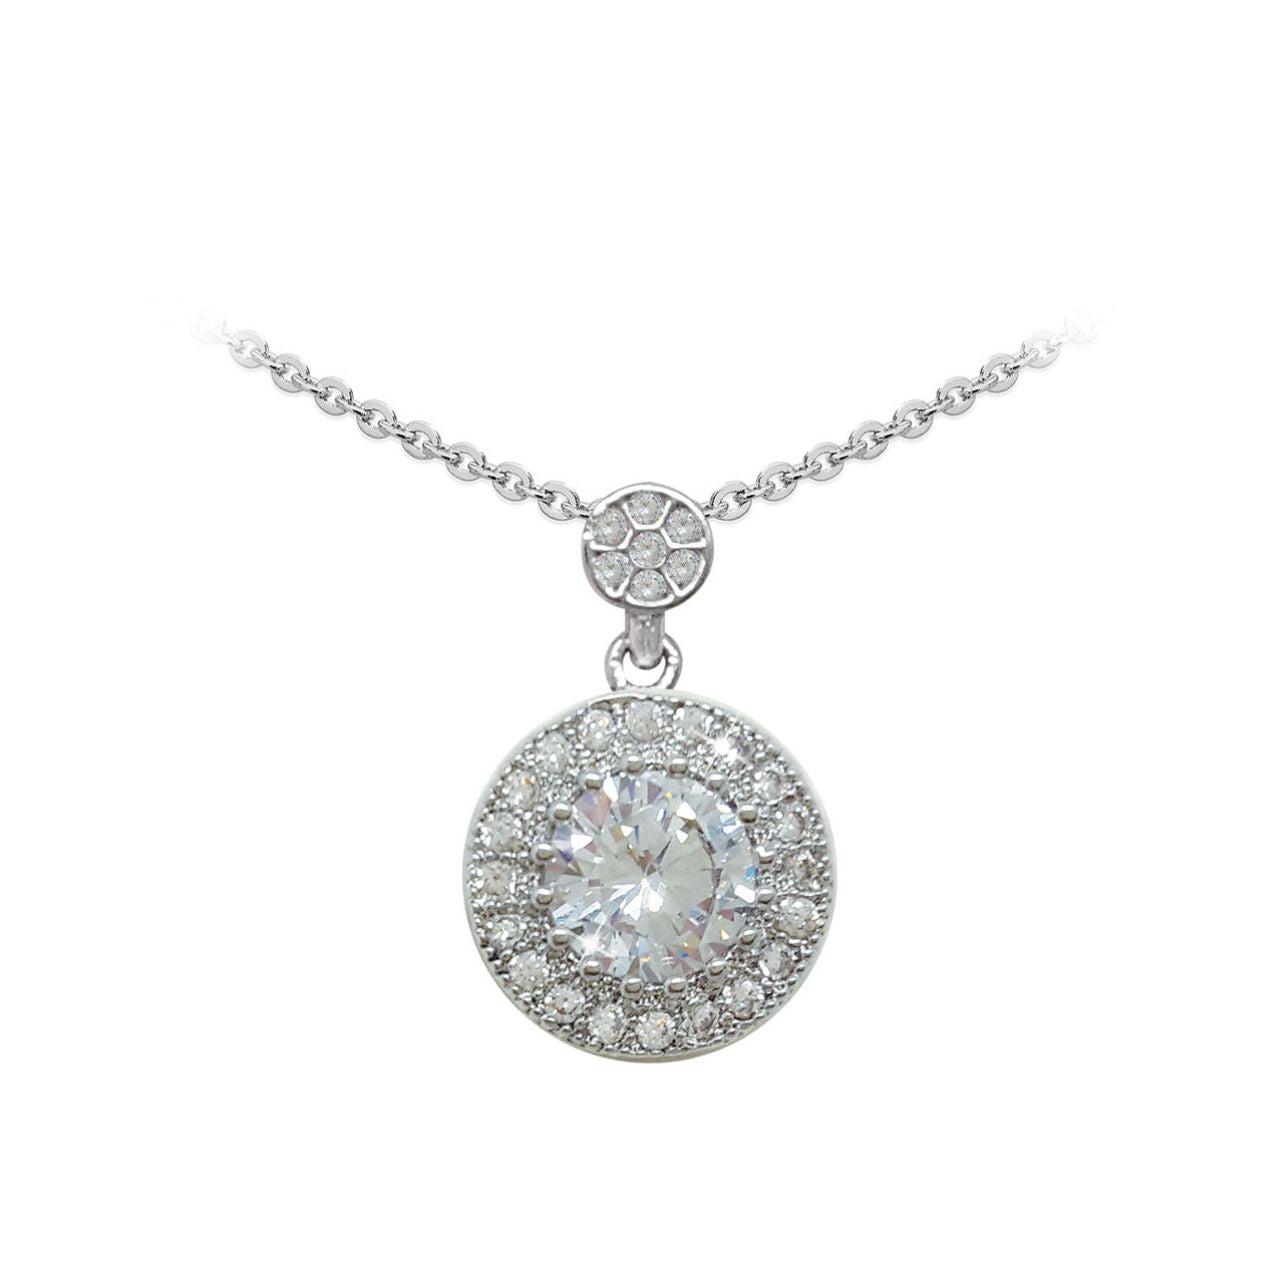 Tipperary Silver Round Pendant Pave Set Set Surround  A romantic choice that will be cherished forever, this vintage-inspired pendant is certain to become a favourite. Crafted in timeless silver, the circle pendant features a large round crystal centre-stone and an intricate milgrain detail that shimmers with a halo frame of smaller set clear crystals.